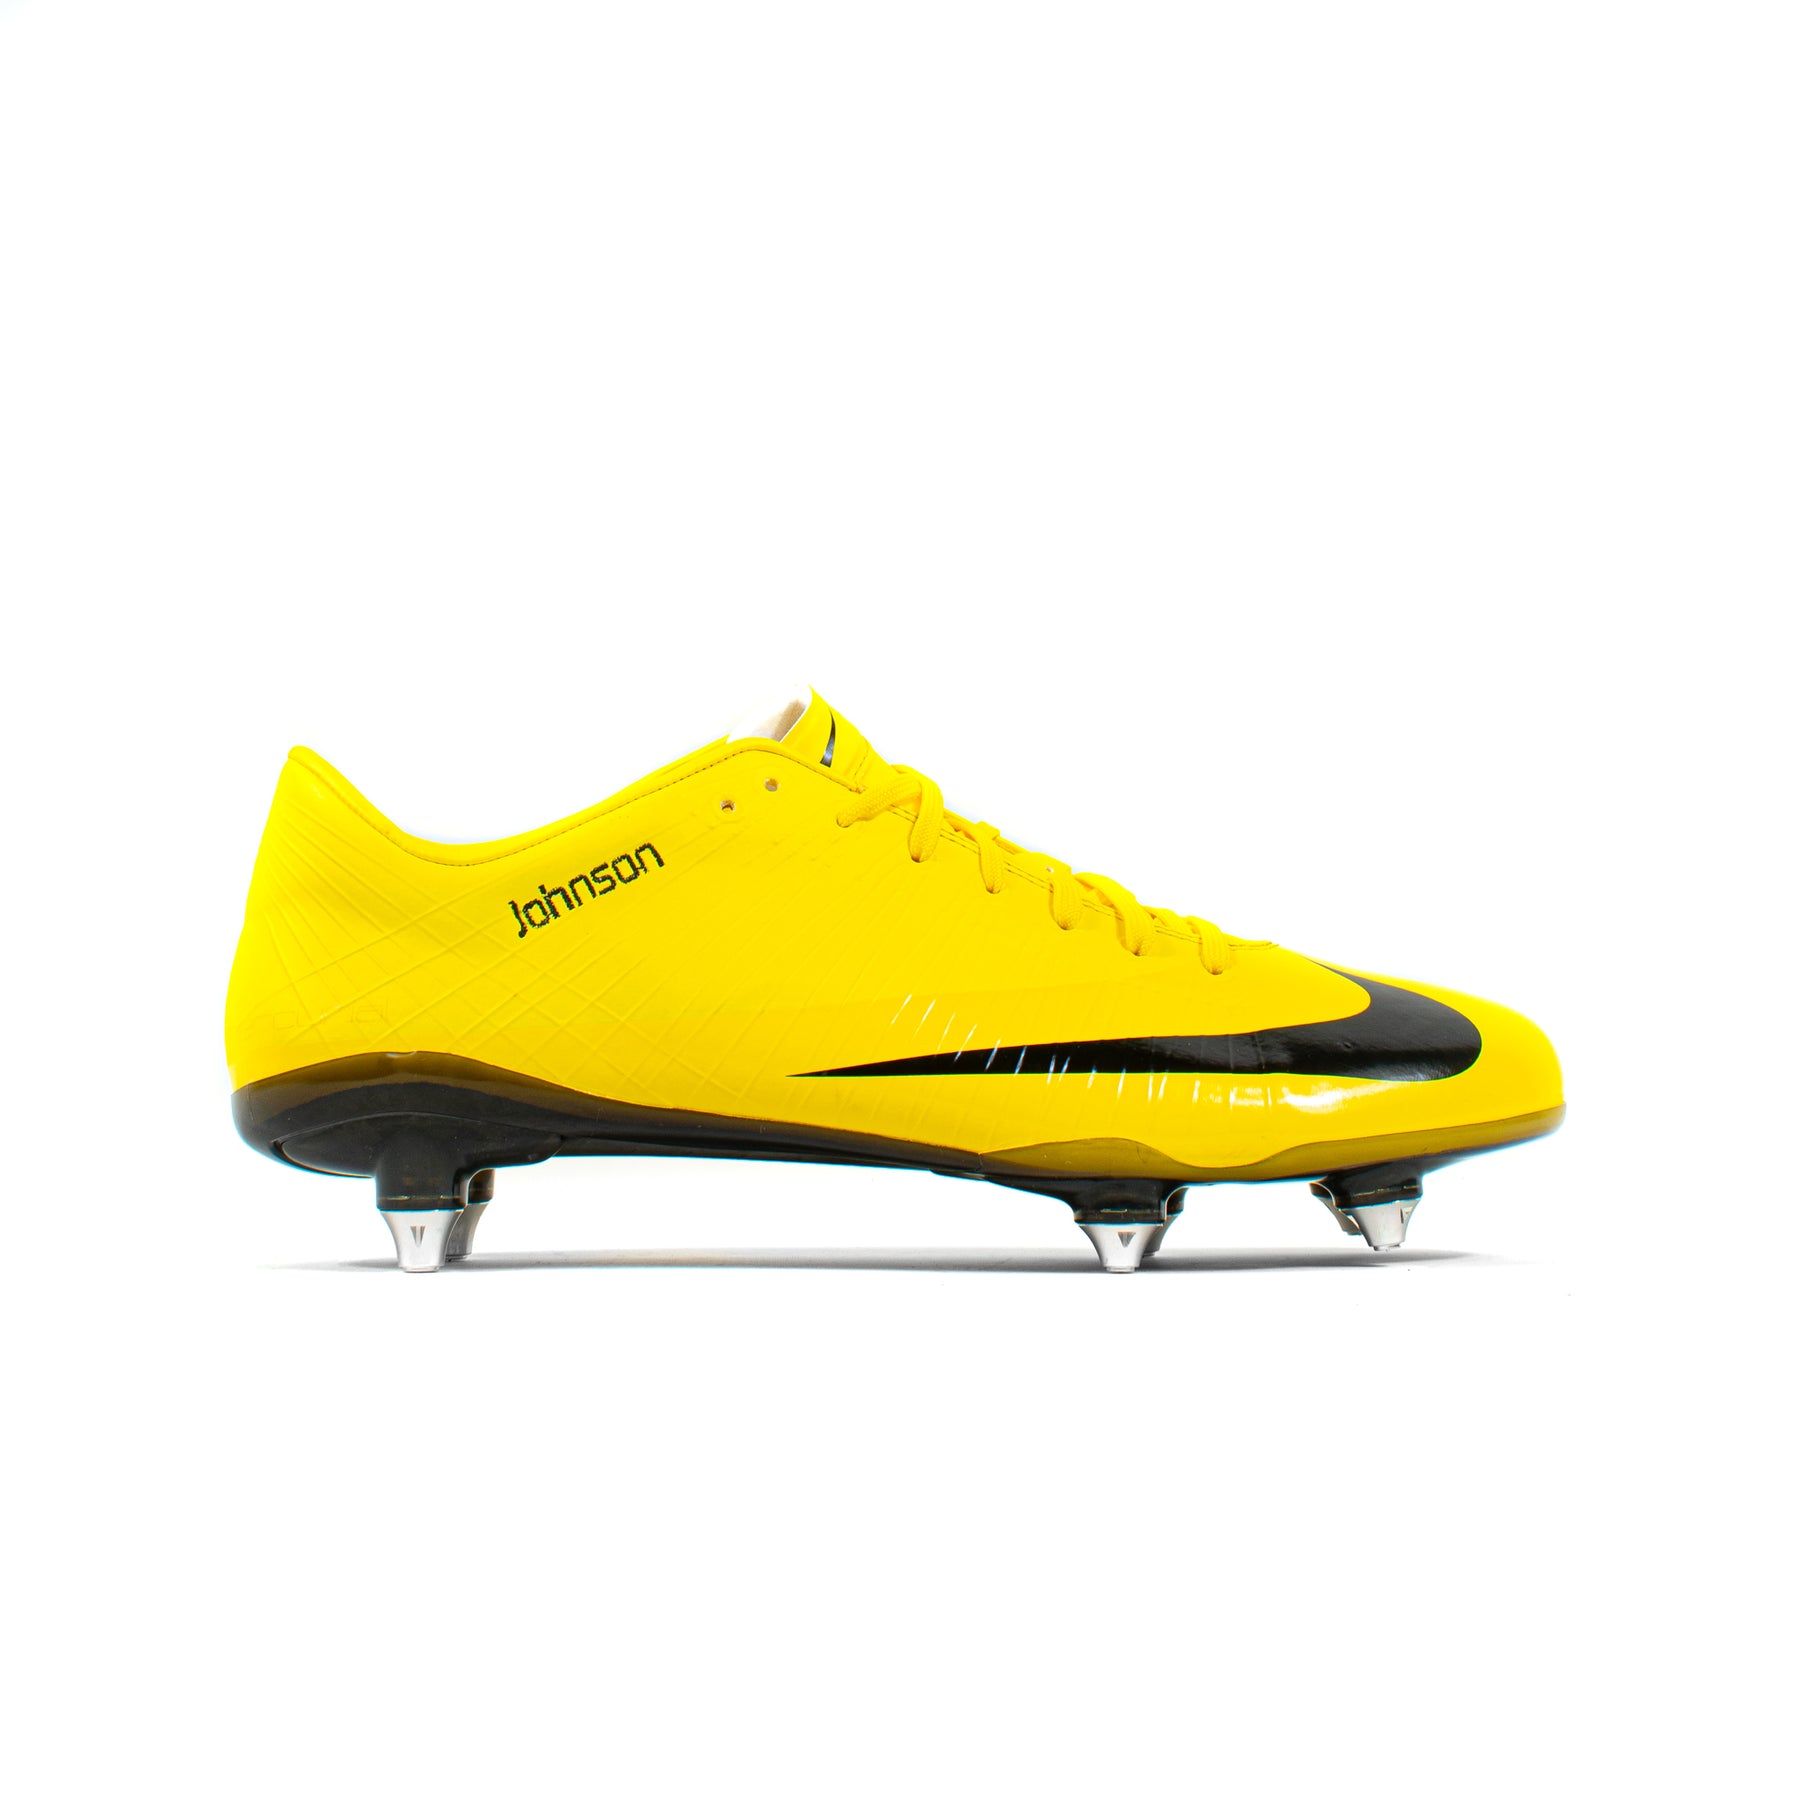 Nike Mercurial Vapor Superfly I Yellow SG – Classic Soccer Cleats